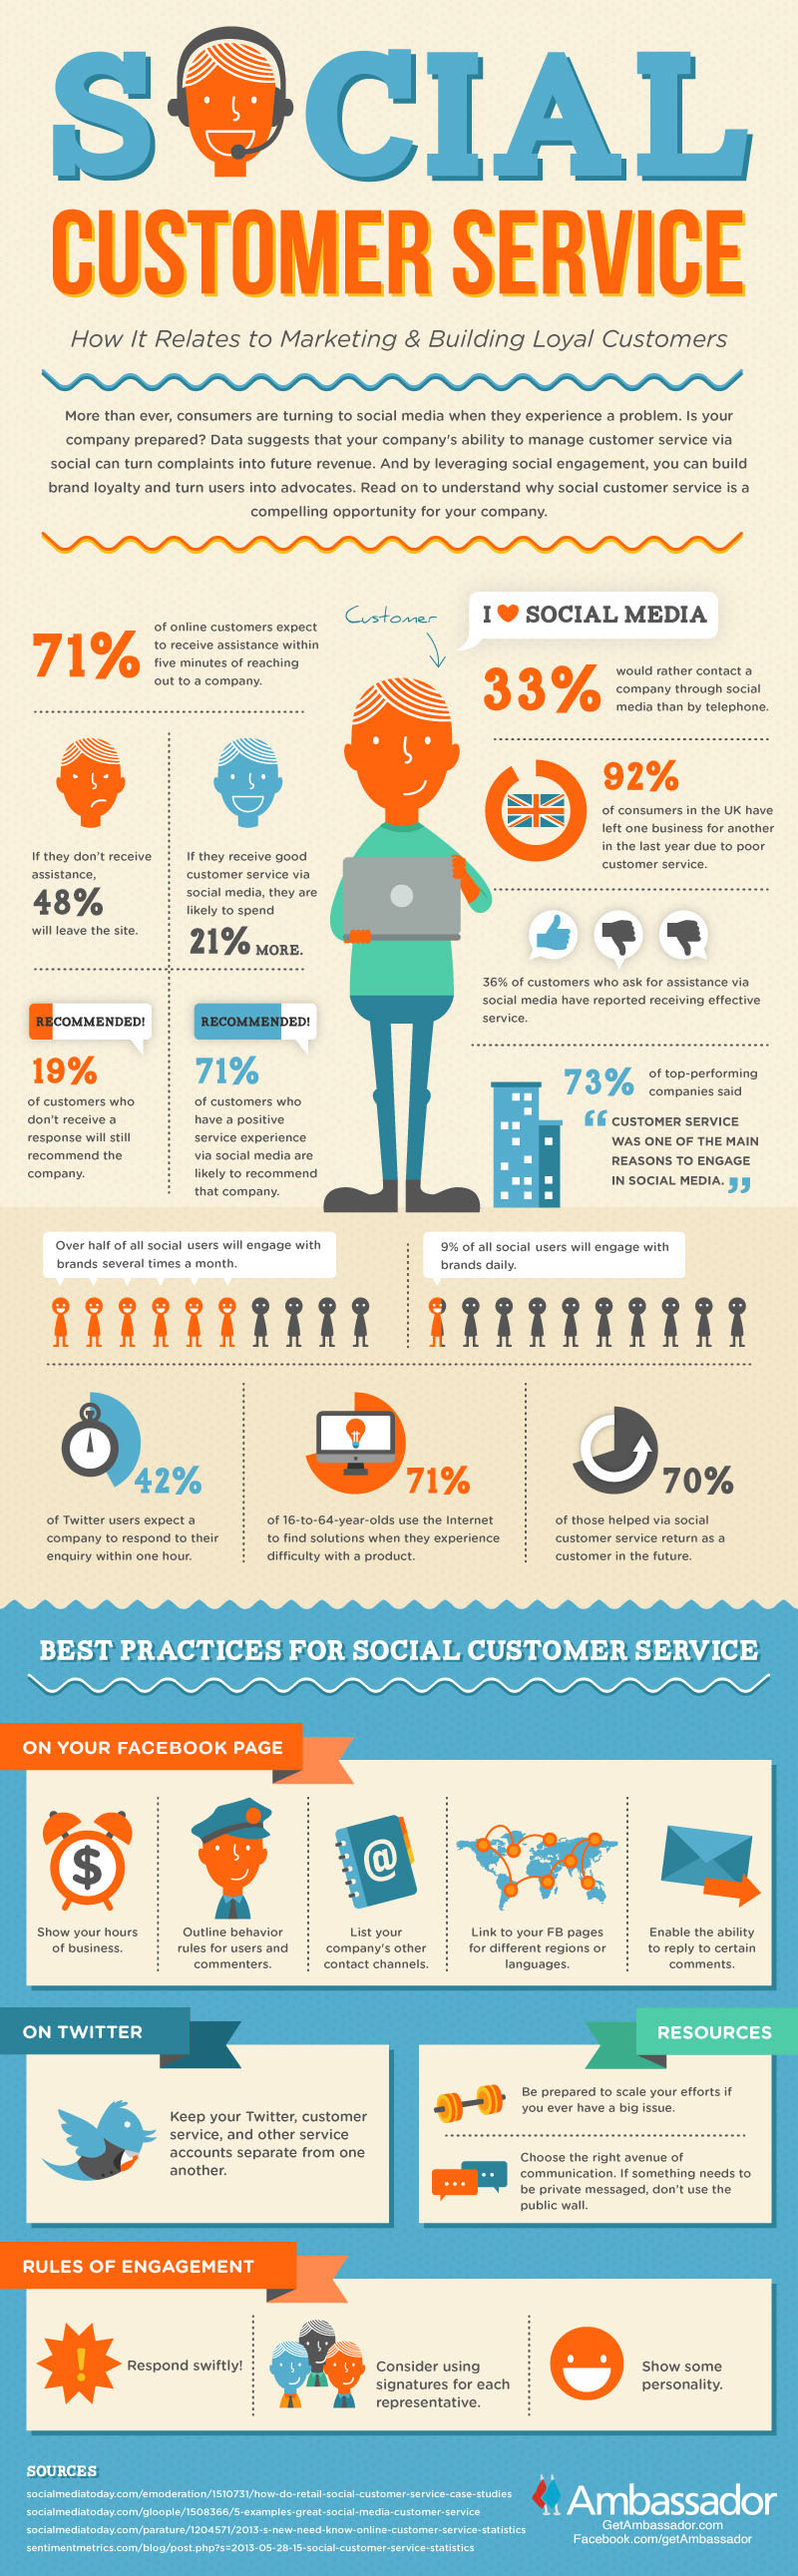 social customer service infographic